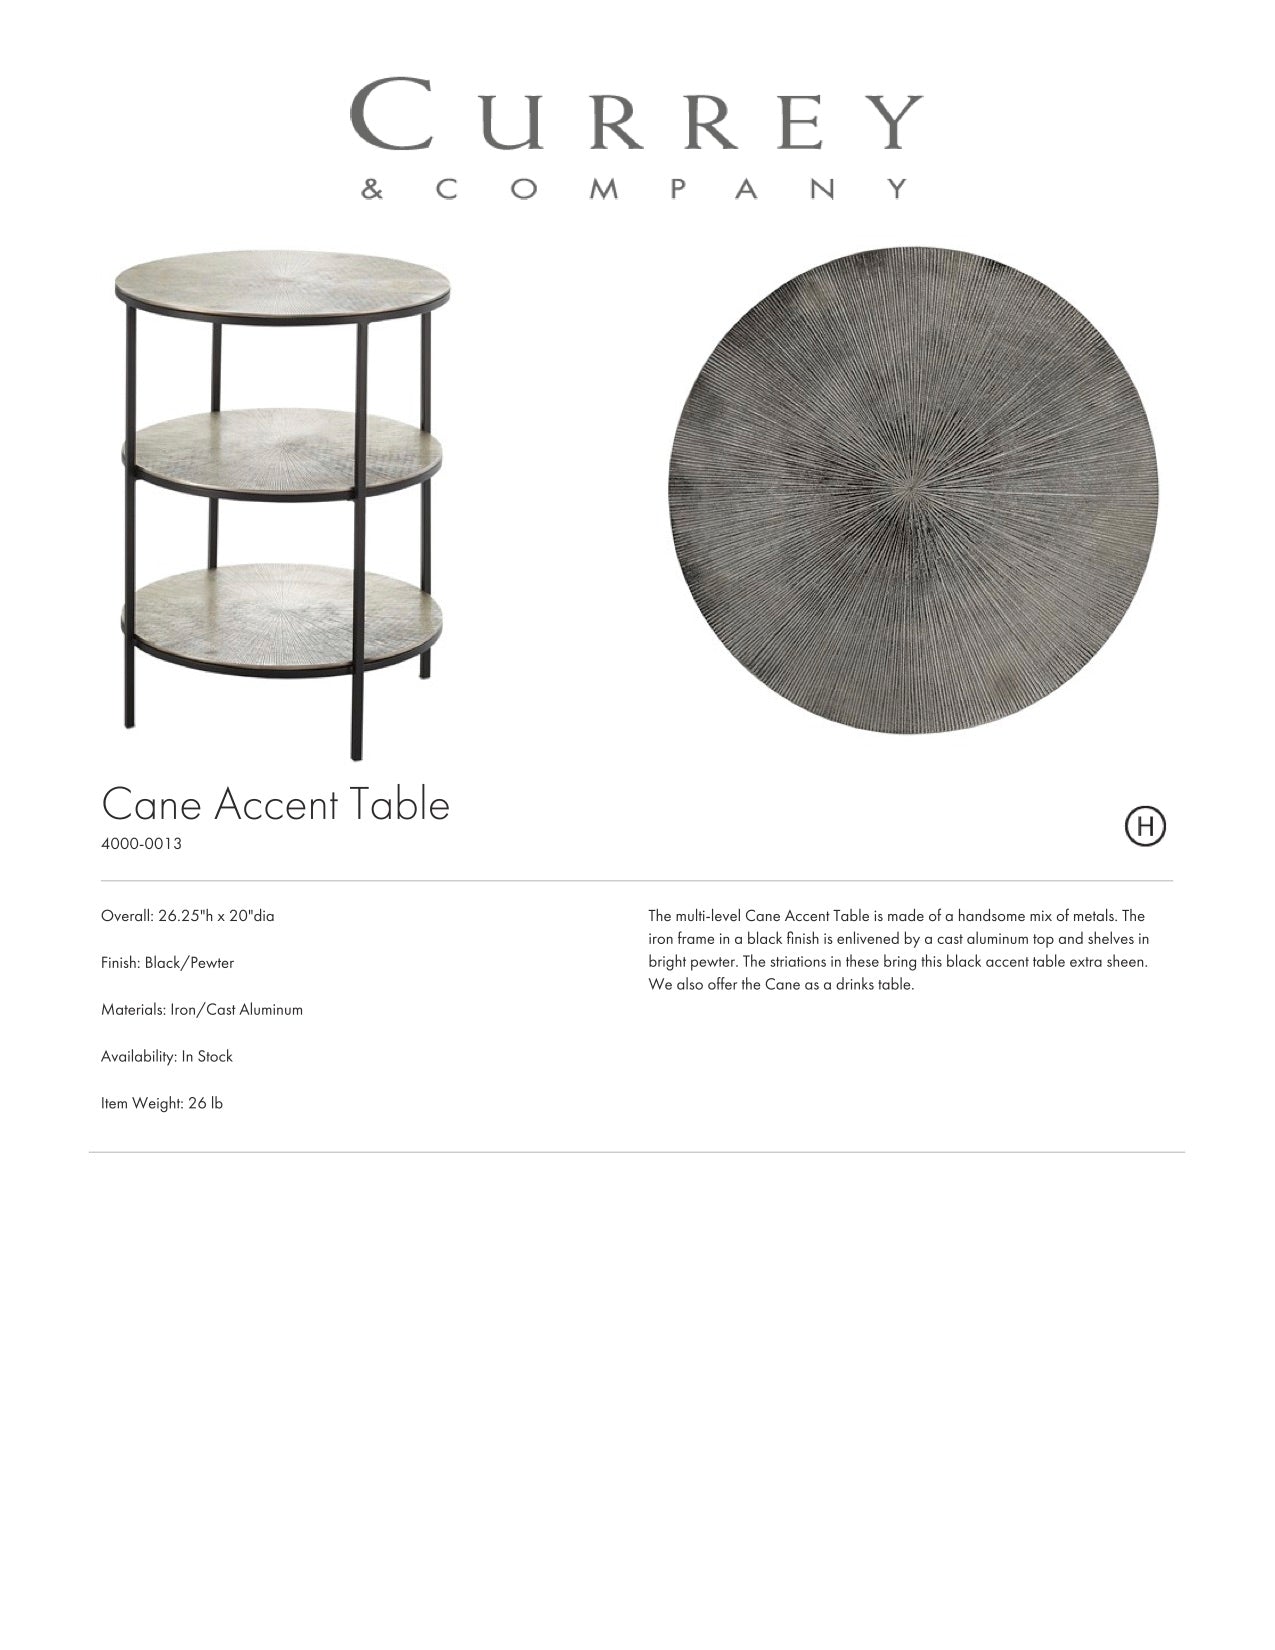 Currey & Company Cane Accent Table Tearsheet